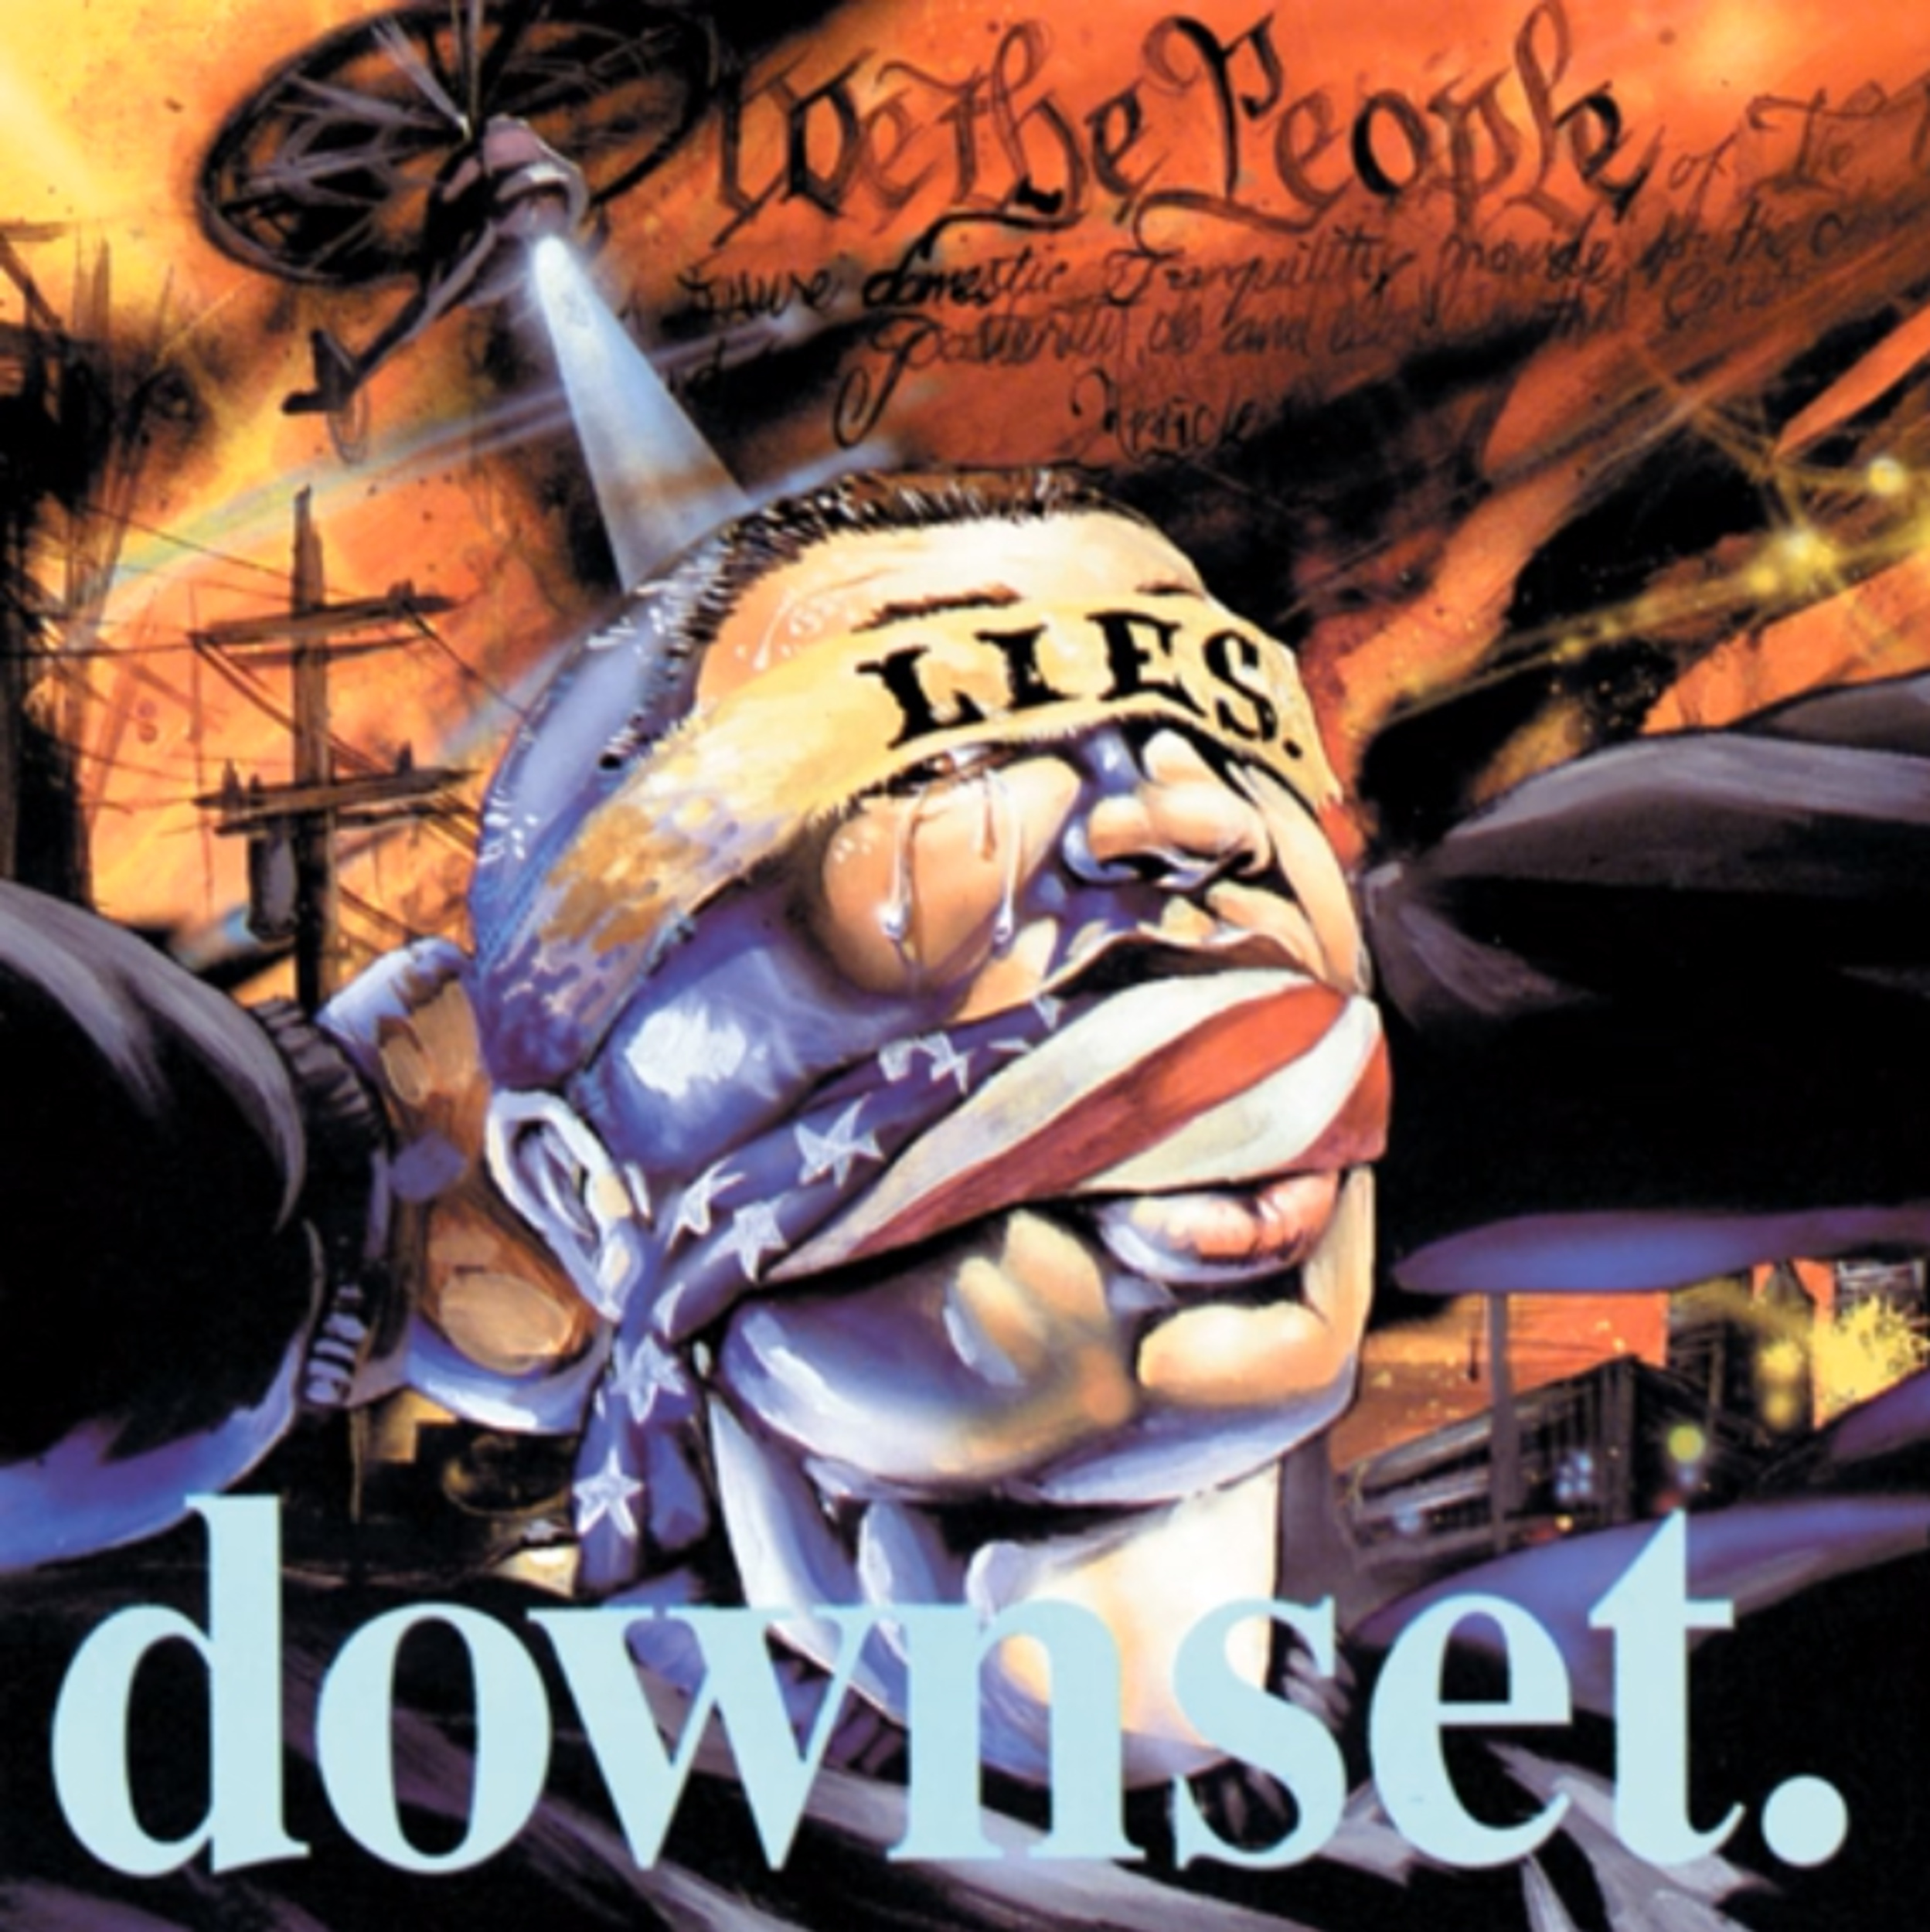 <p>Starting in 1989 as Social Justice, the group self-released an album and EP under this name before rebranding as downset. in 1992. With a foundation of hardcore, downset. fused elements of funk and politically charged rap, which gained the attention of Mercury Records. <em>downset.</em> was their major label debut, featuring their lead single "Anger" (with the offending Rage Against the Machine diss removed).<em> downset</em>. is a fiery album that not only makes the body move, but engages the mind as well.</p><p>You may also like: <a href='https://www.yardbarker.com/entertainment/articles/20_period_pieces_you_should_watch/s1__40240173'>20 period pieces you should watch</a></p>